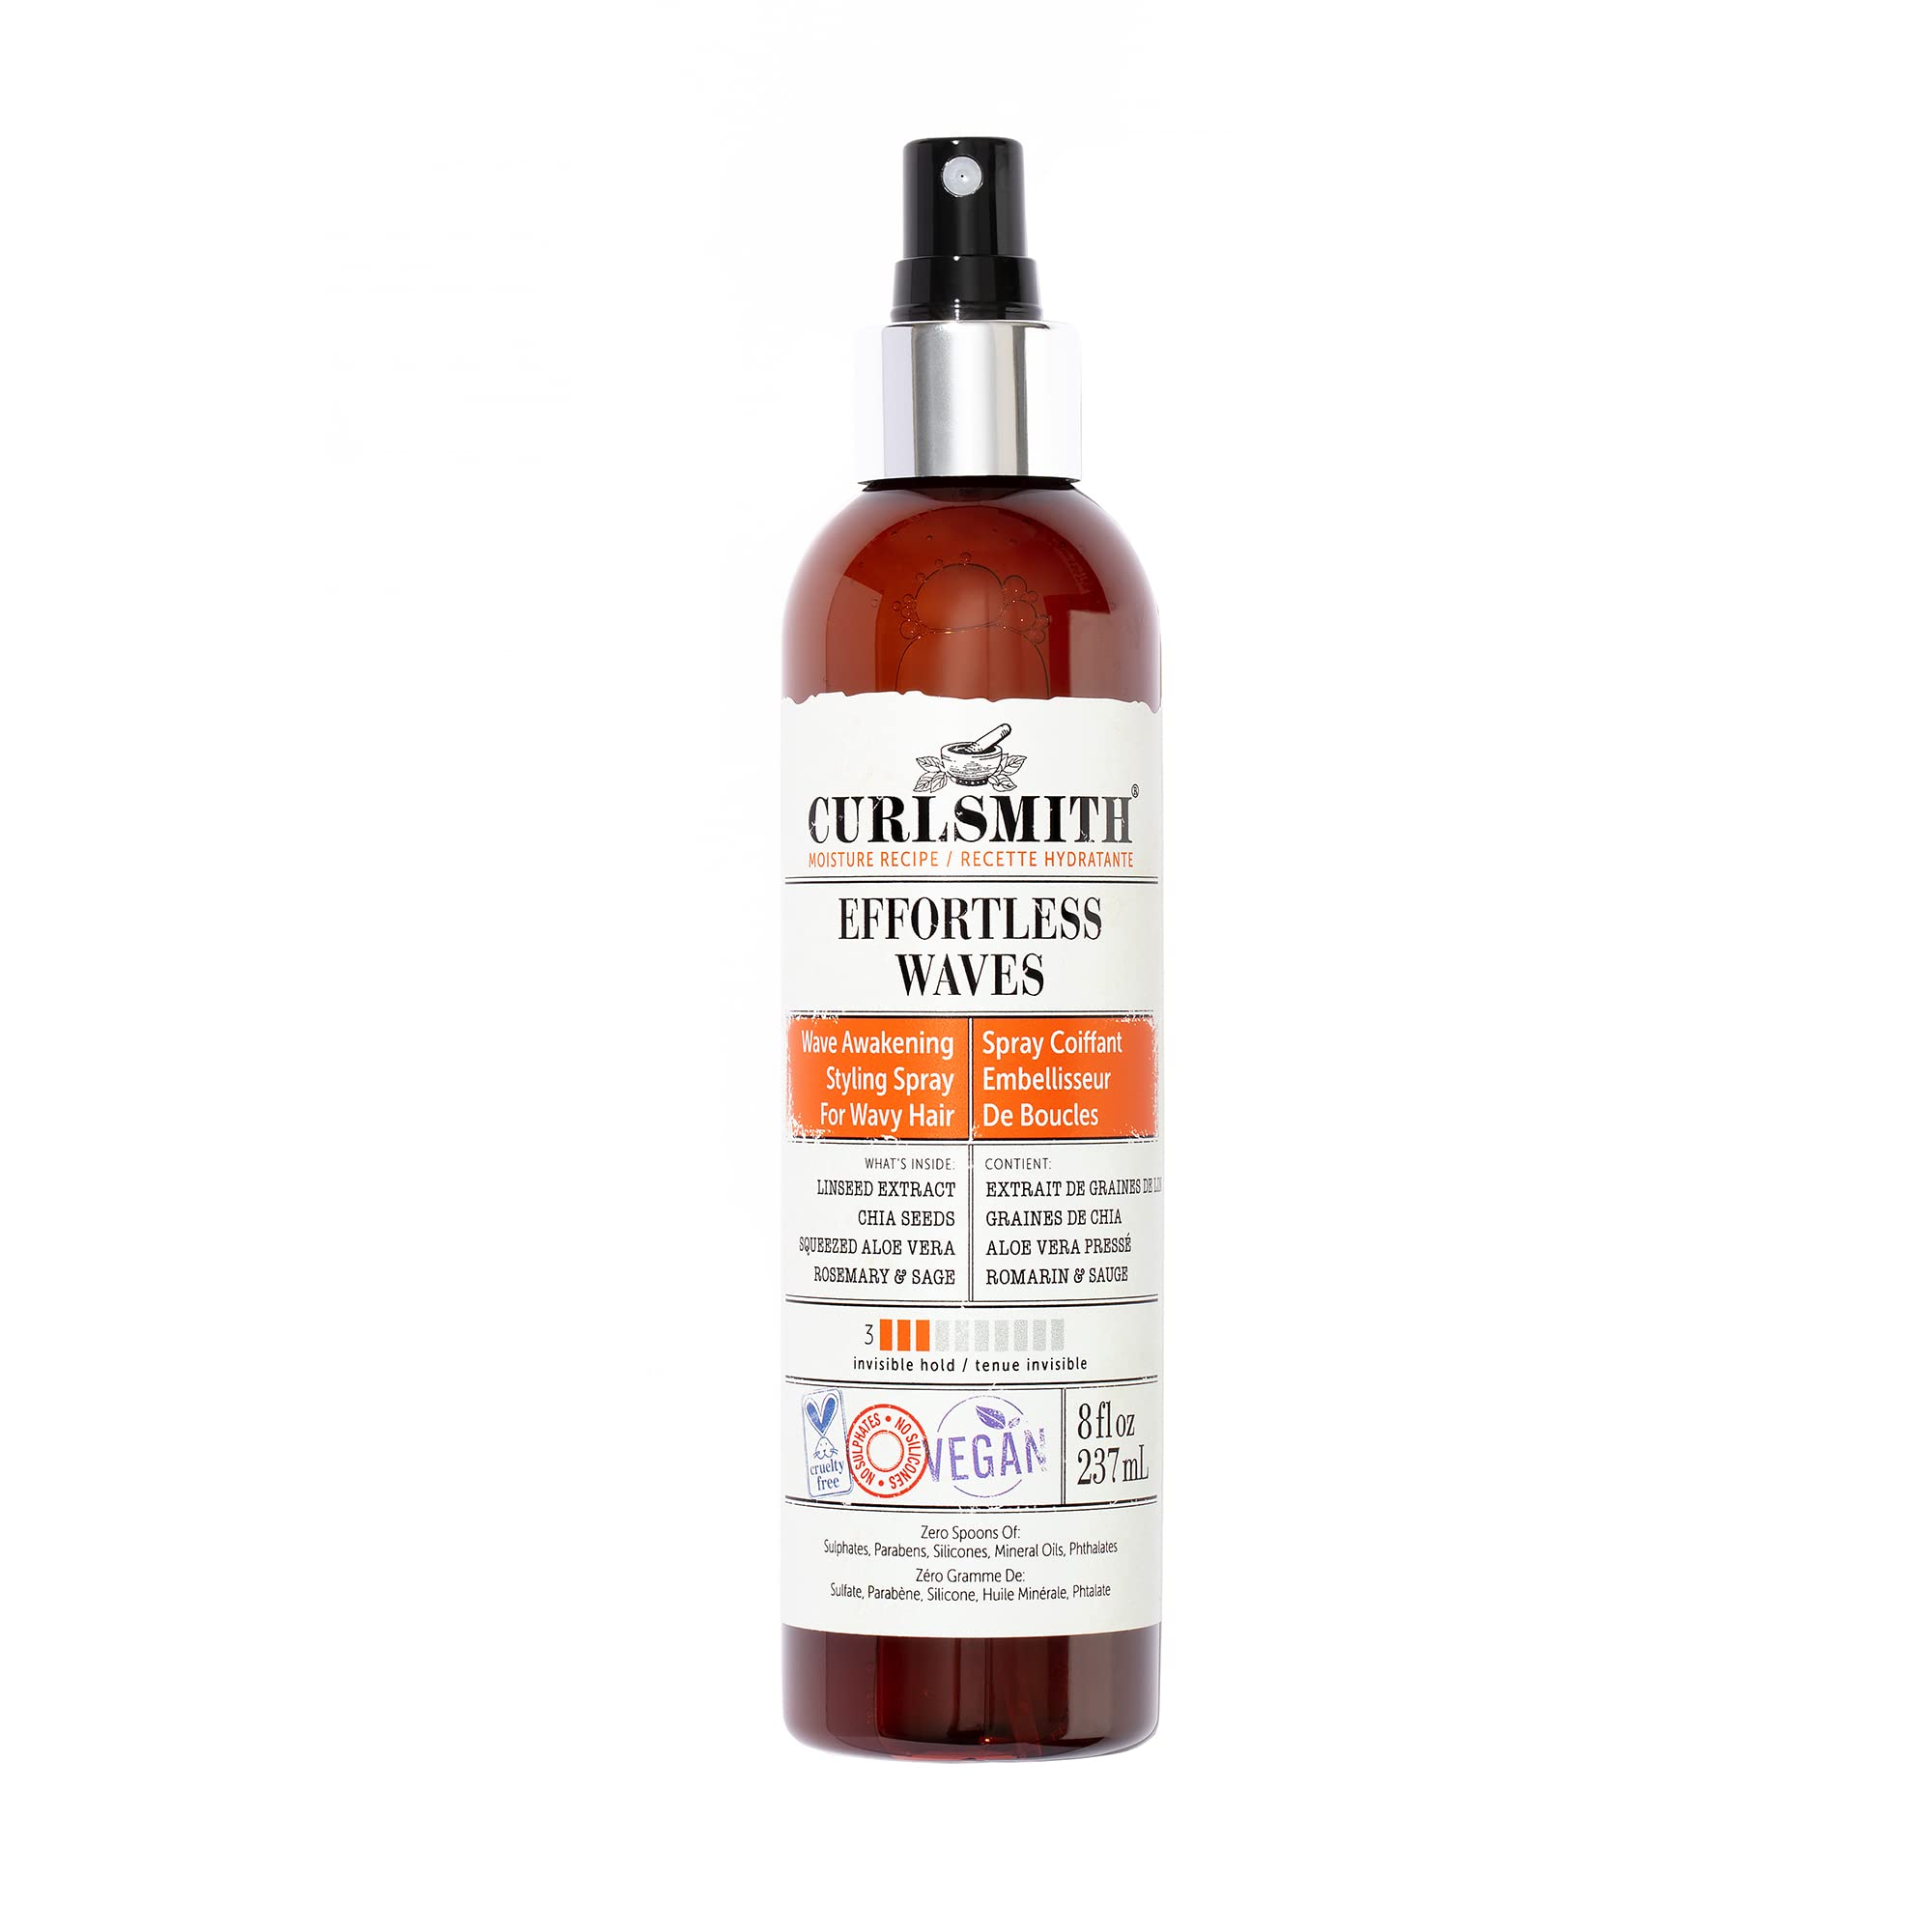 CURLSMITH - Effortless Waves Styling Spray, Lightweight and Moisturising, Reduce Frizz, Natural Look, For Wavy and Curly Hair, Vegan (237ml/8 fl oz)